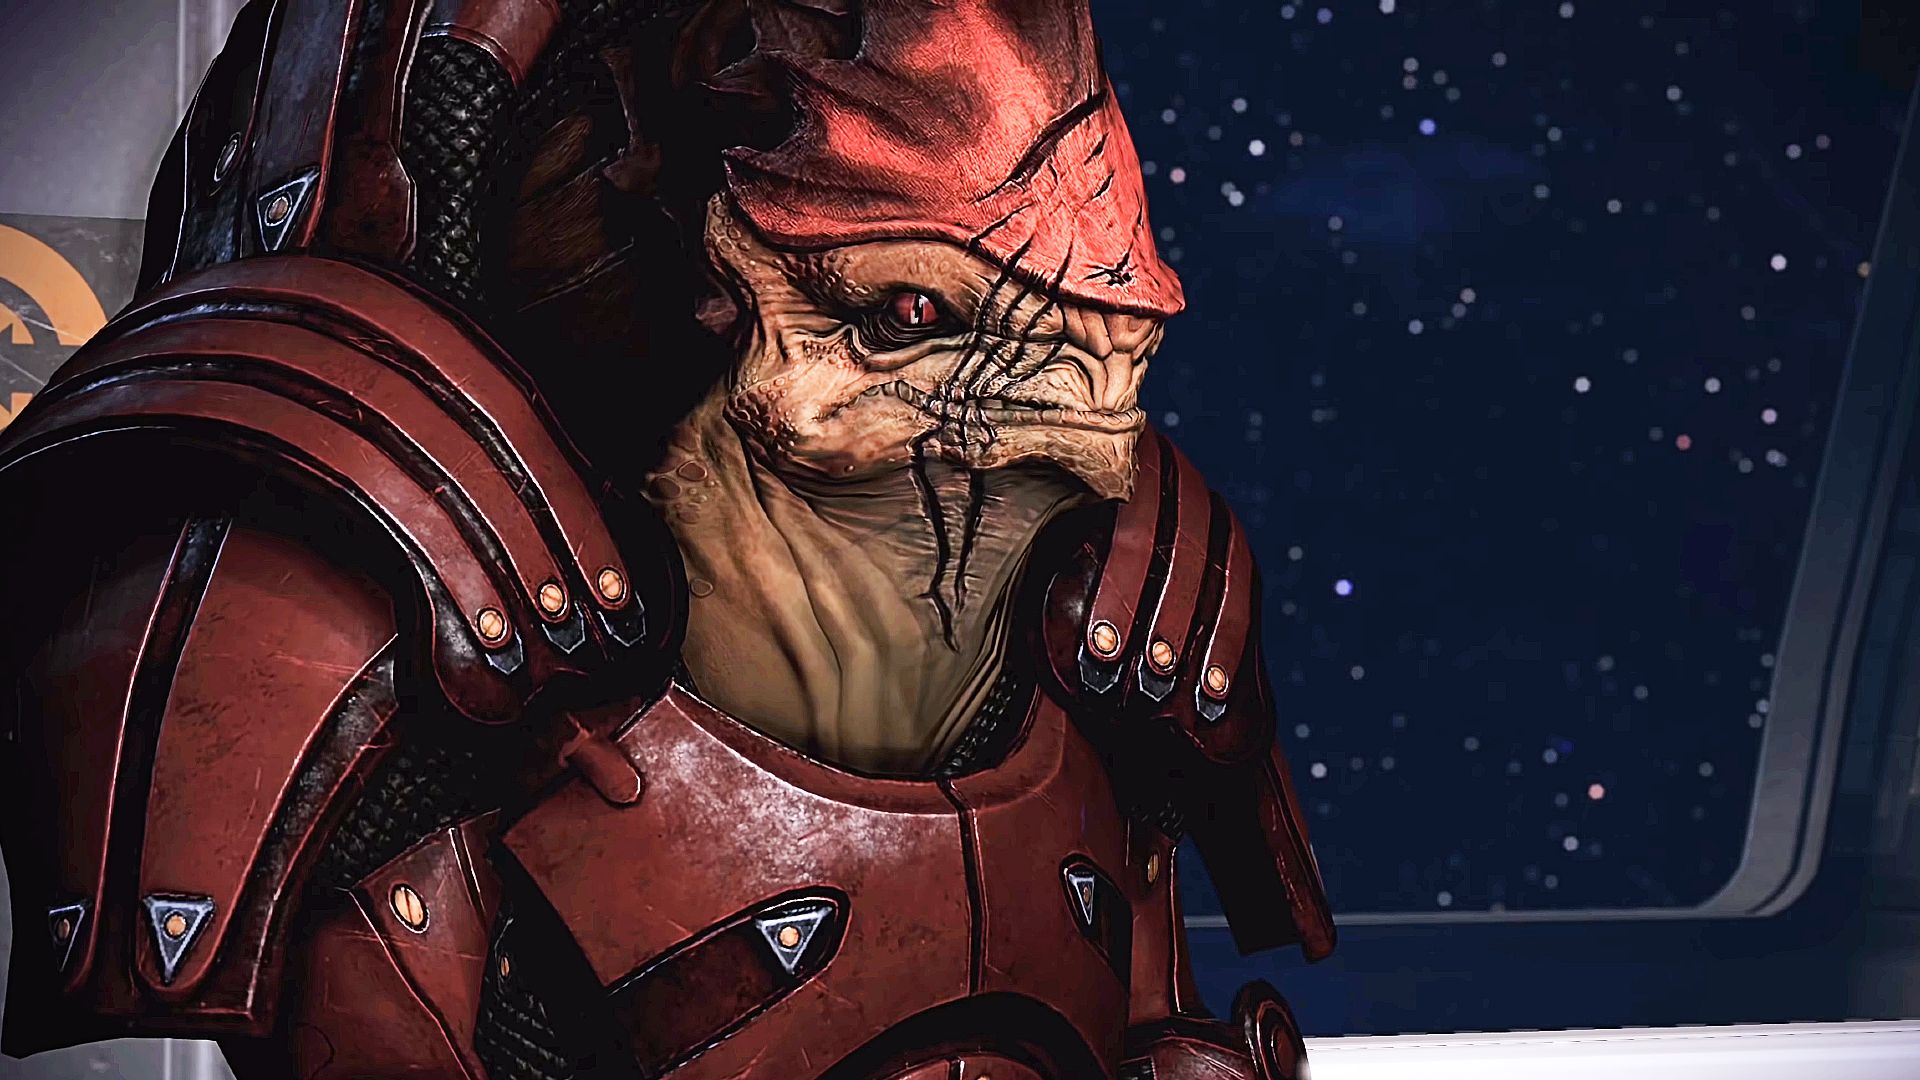 Mass Effect 5 needs to recognise that aliens are people too